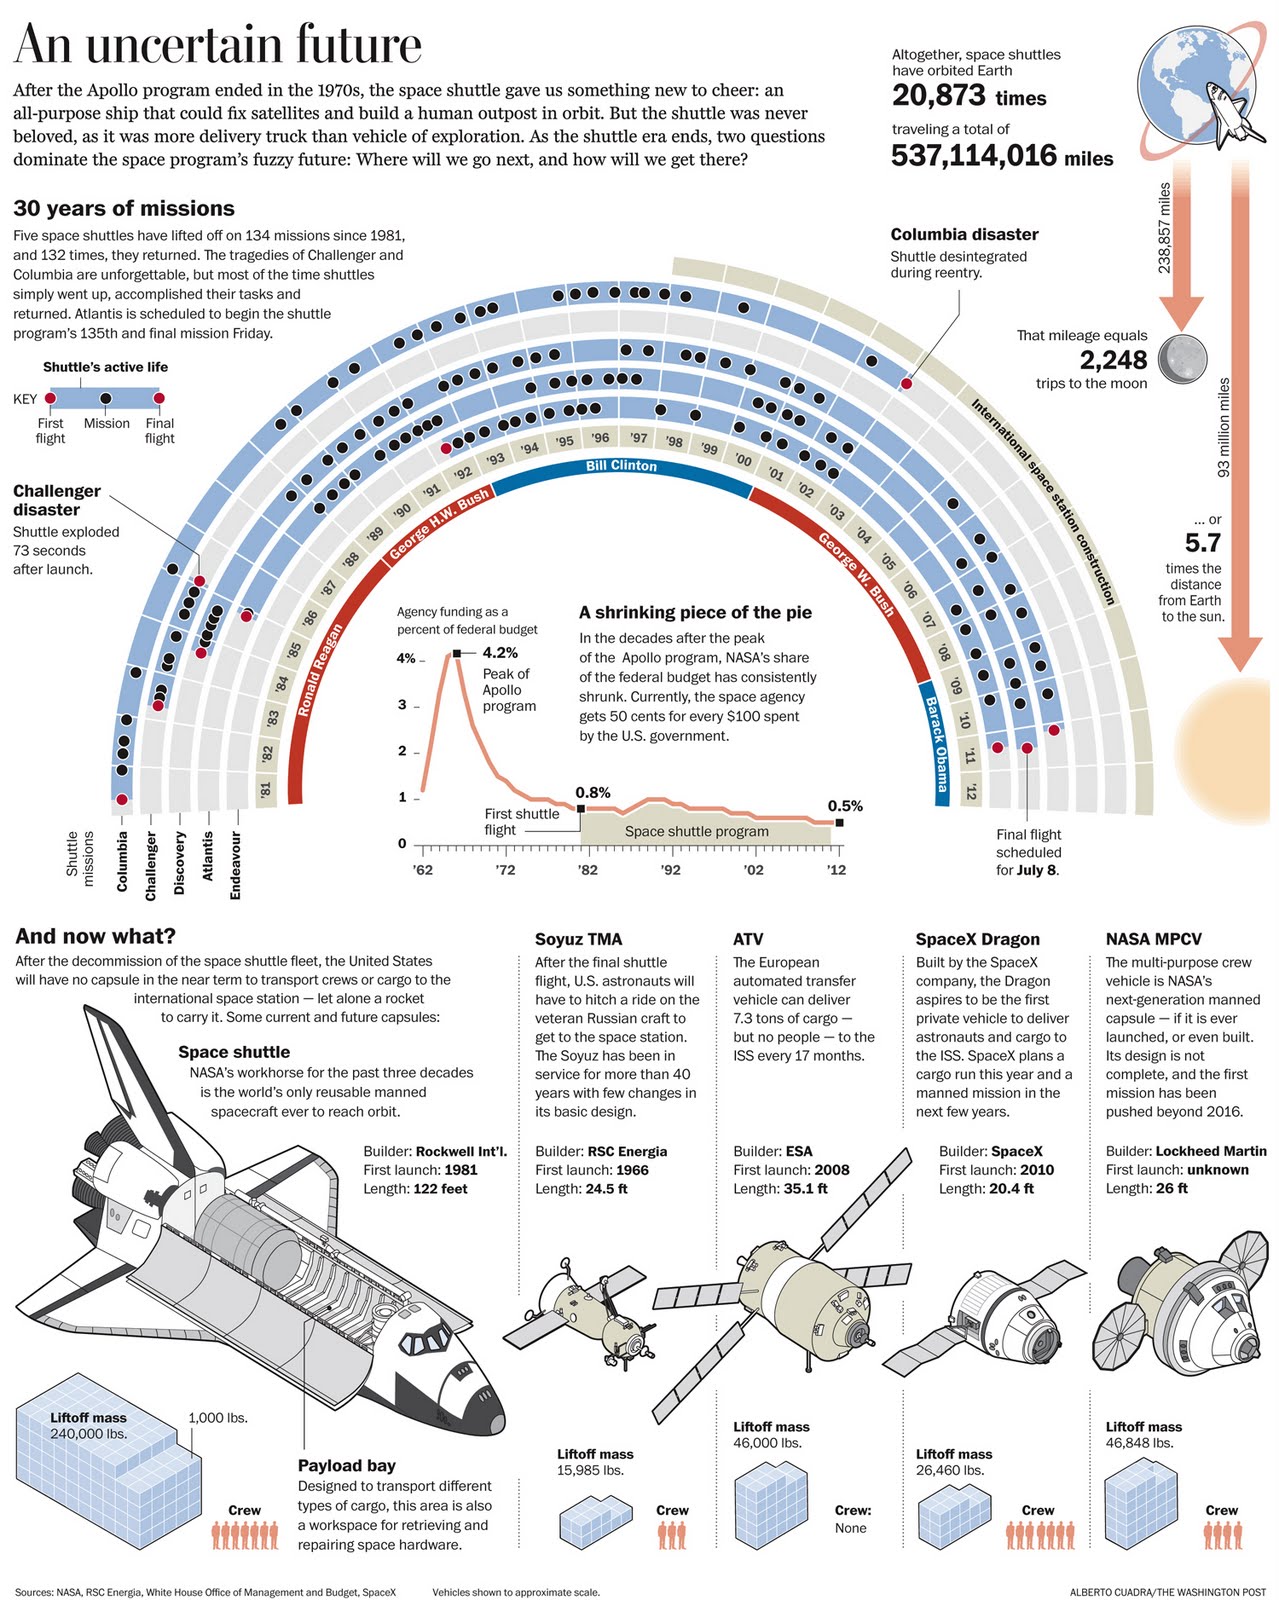 Infographic: End of the Space Shuttle program